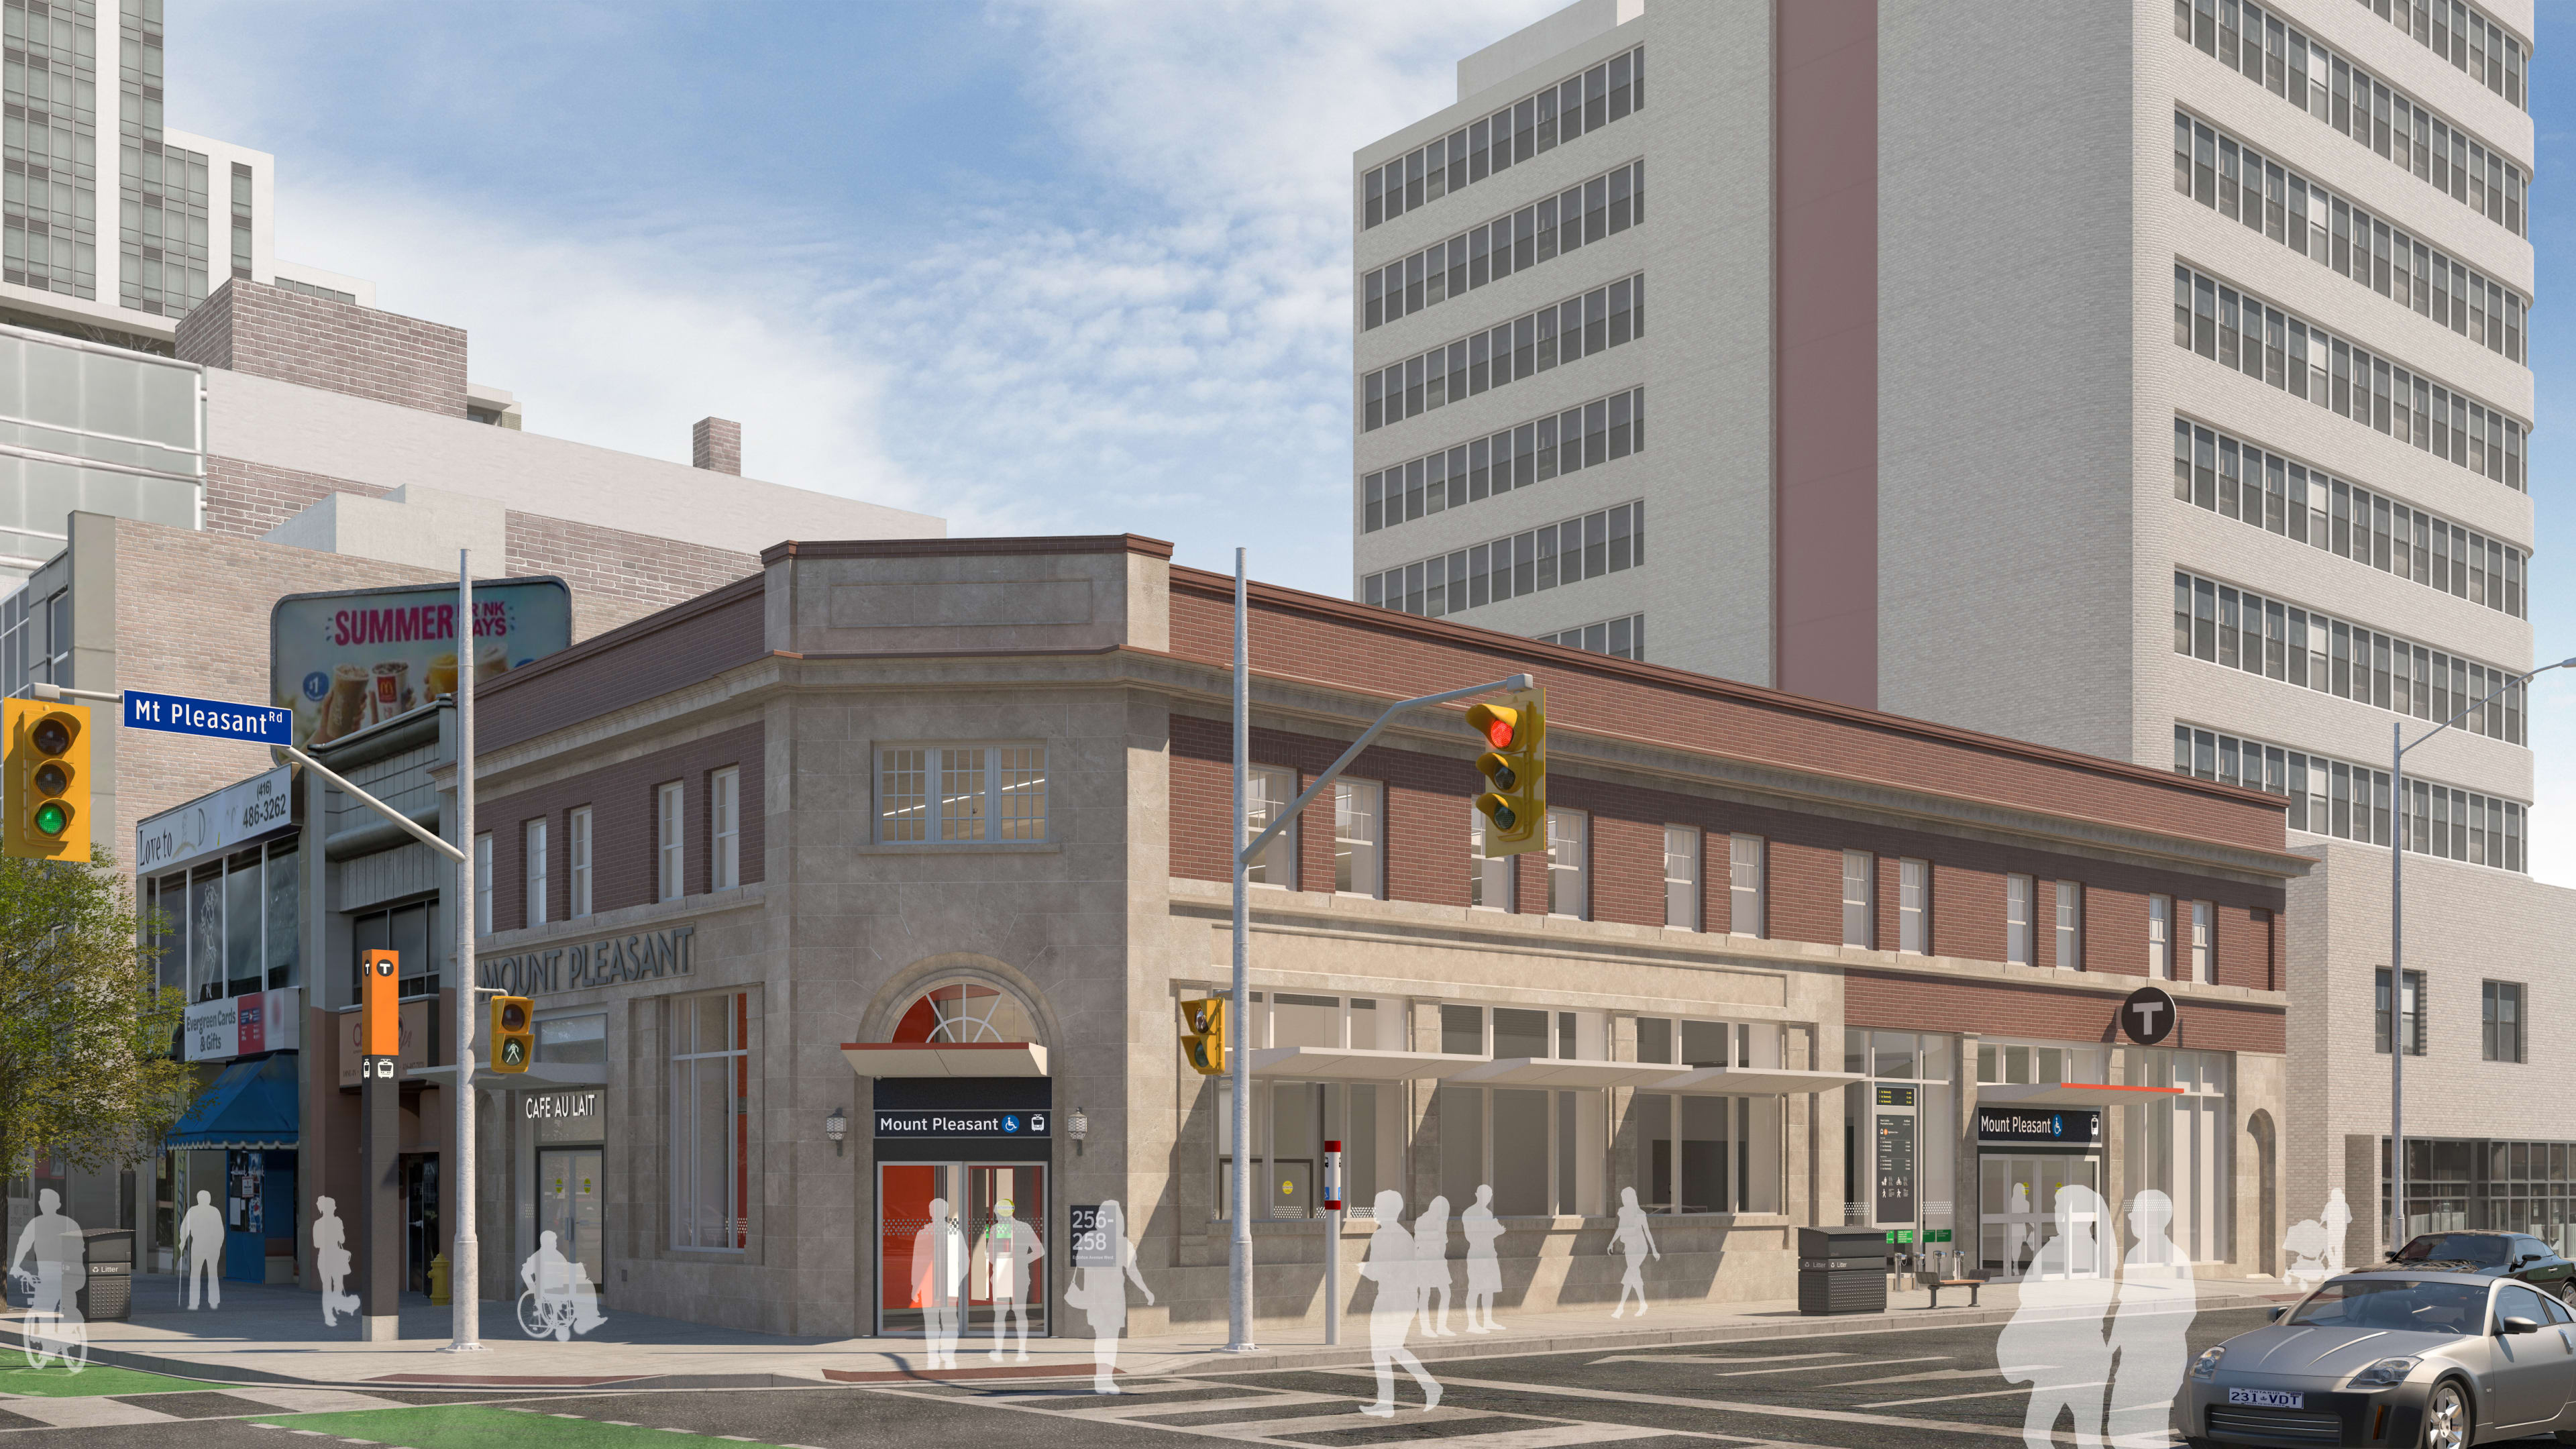 An artist rendering of the station, featuring a front created from old bank bricks.